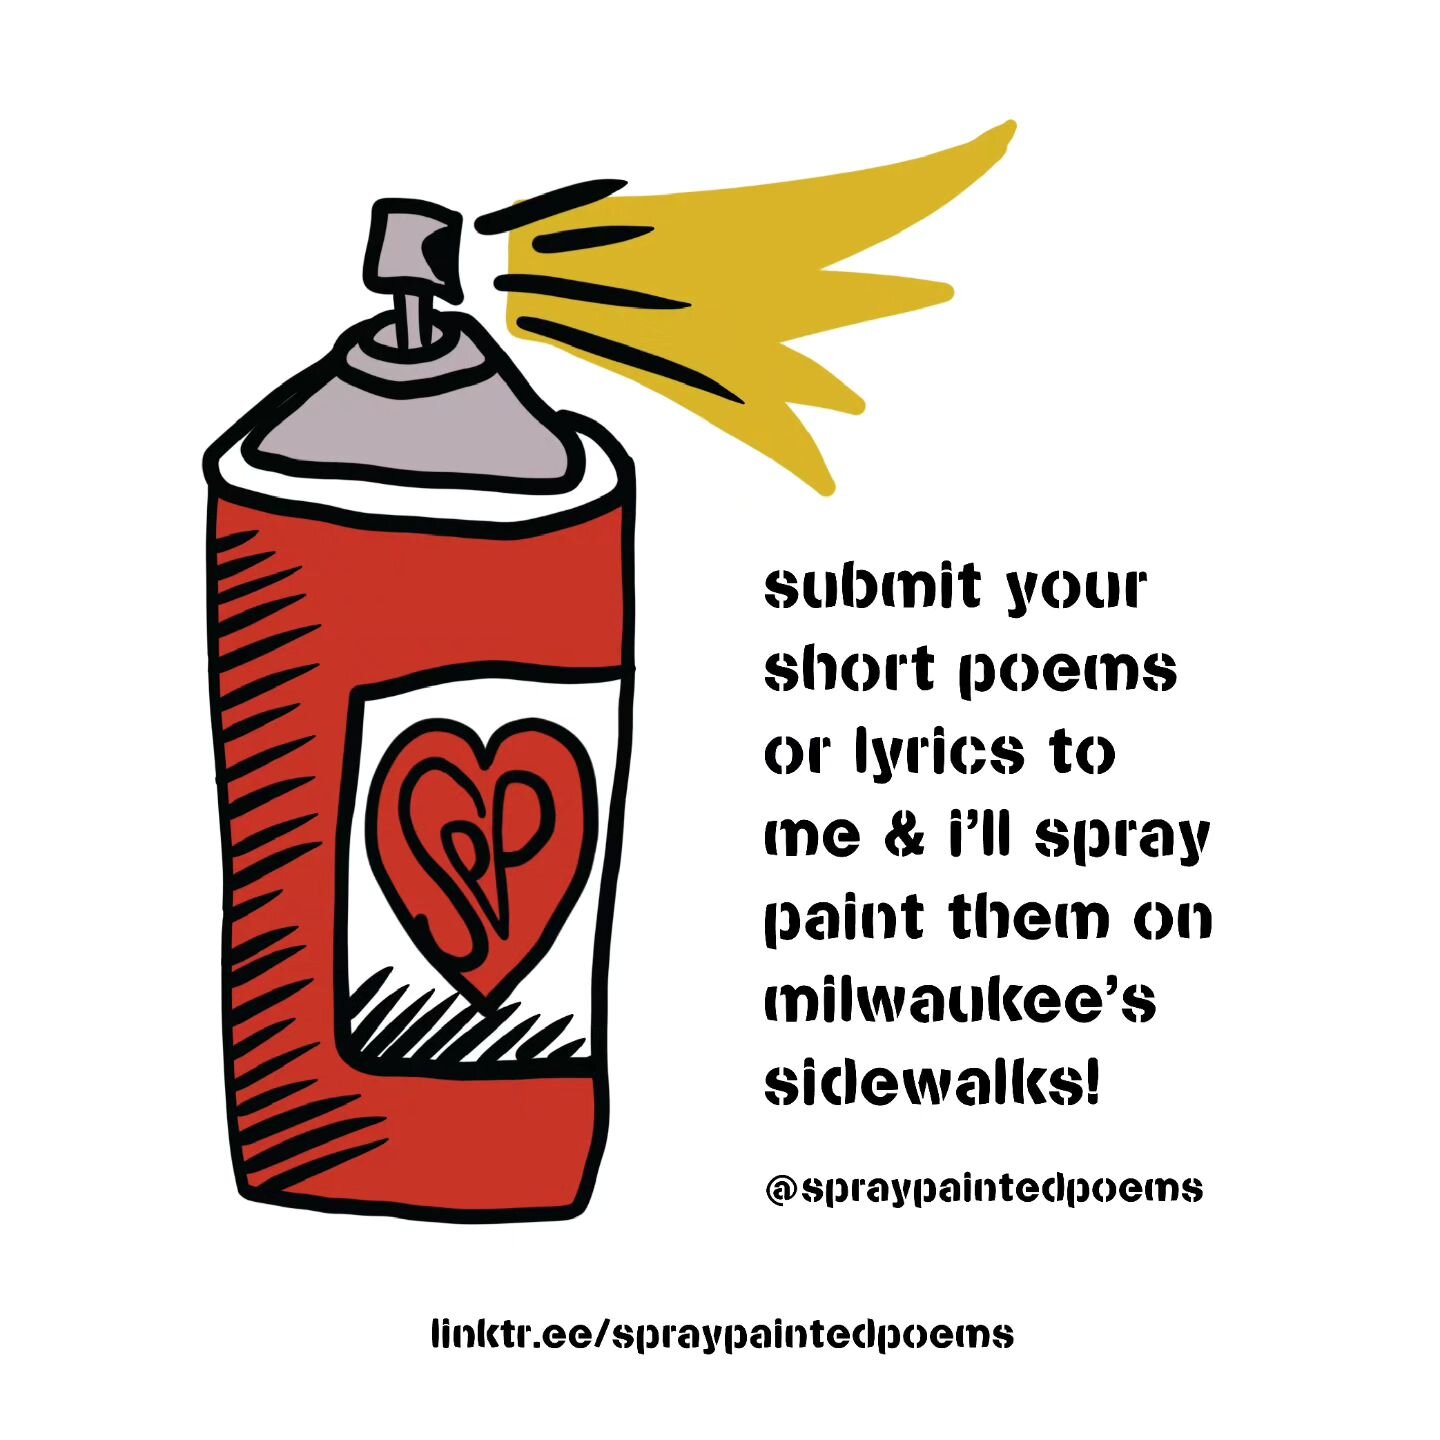 Poetry and lyric submissions for the #spraypaintedpoems first round of painting in the Riverwest neighborhood of Milwaukee are open now! Visit the link in our bio to submit your work!

@SprayPaintedPoems is like it sounds - short poems spray painted 